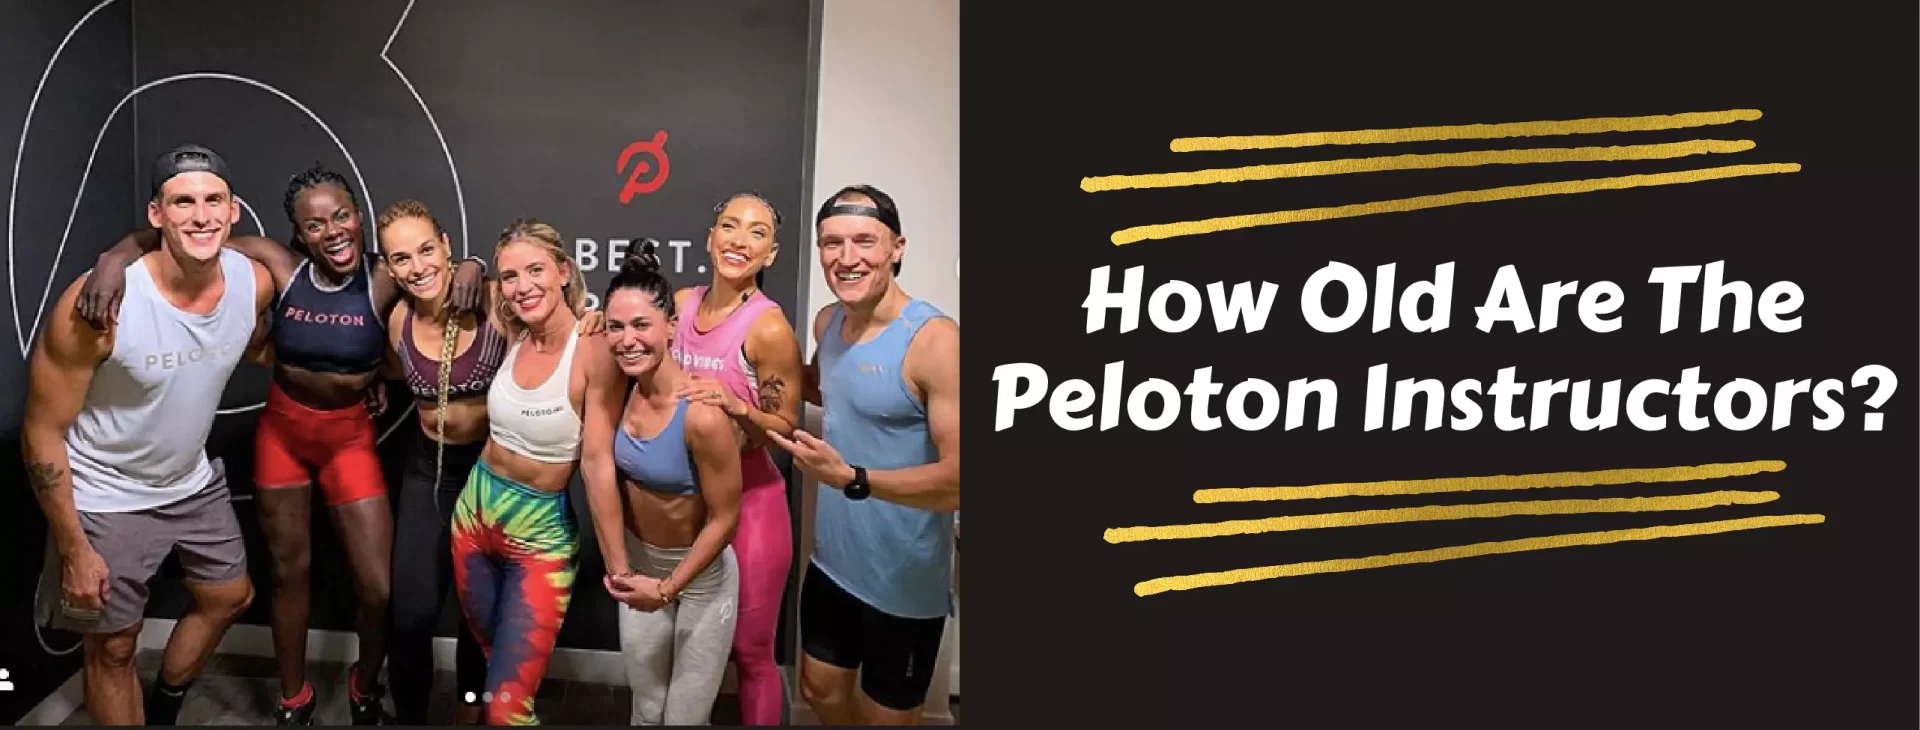 How Old Are The Peloton Instructors